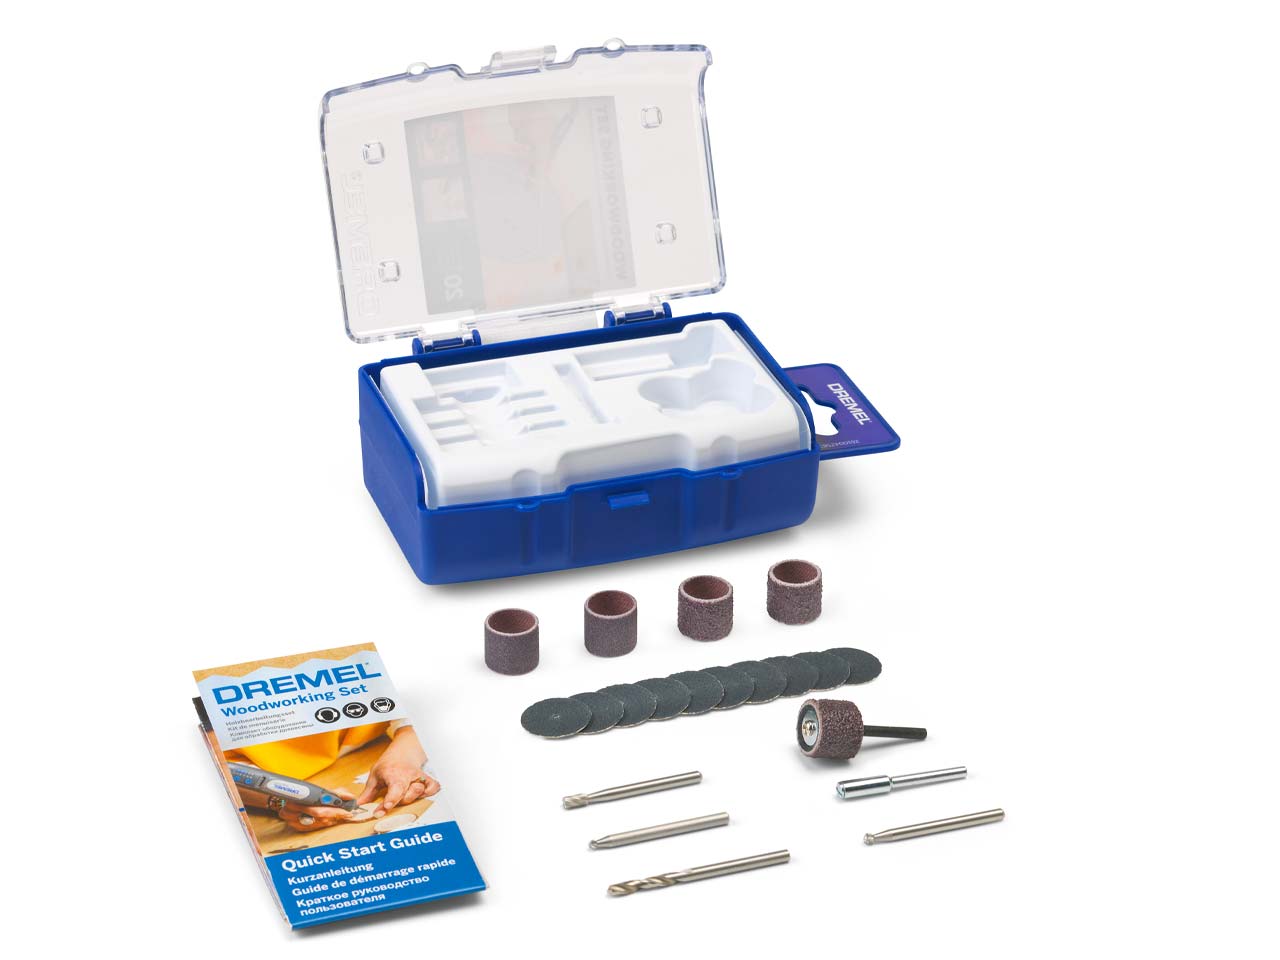 Dremel Wood Working Set 20 Pieces Questions & Answers